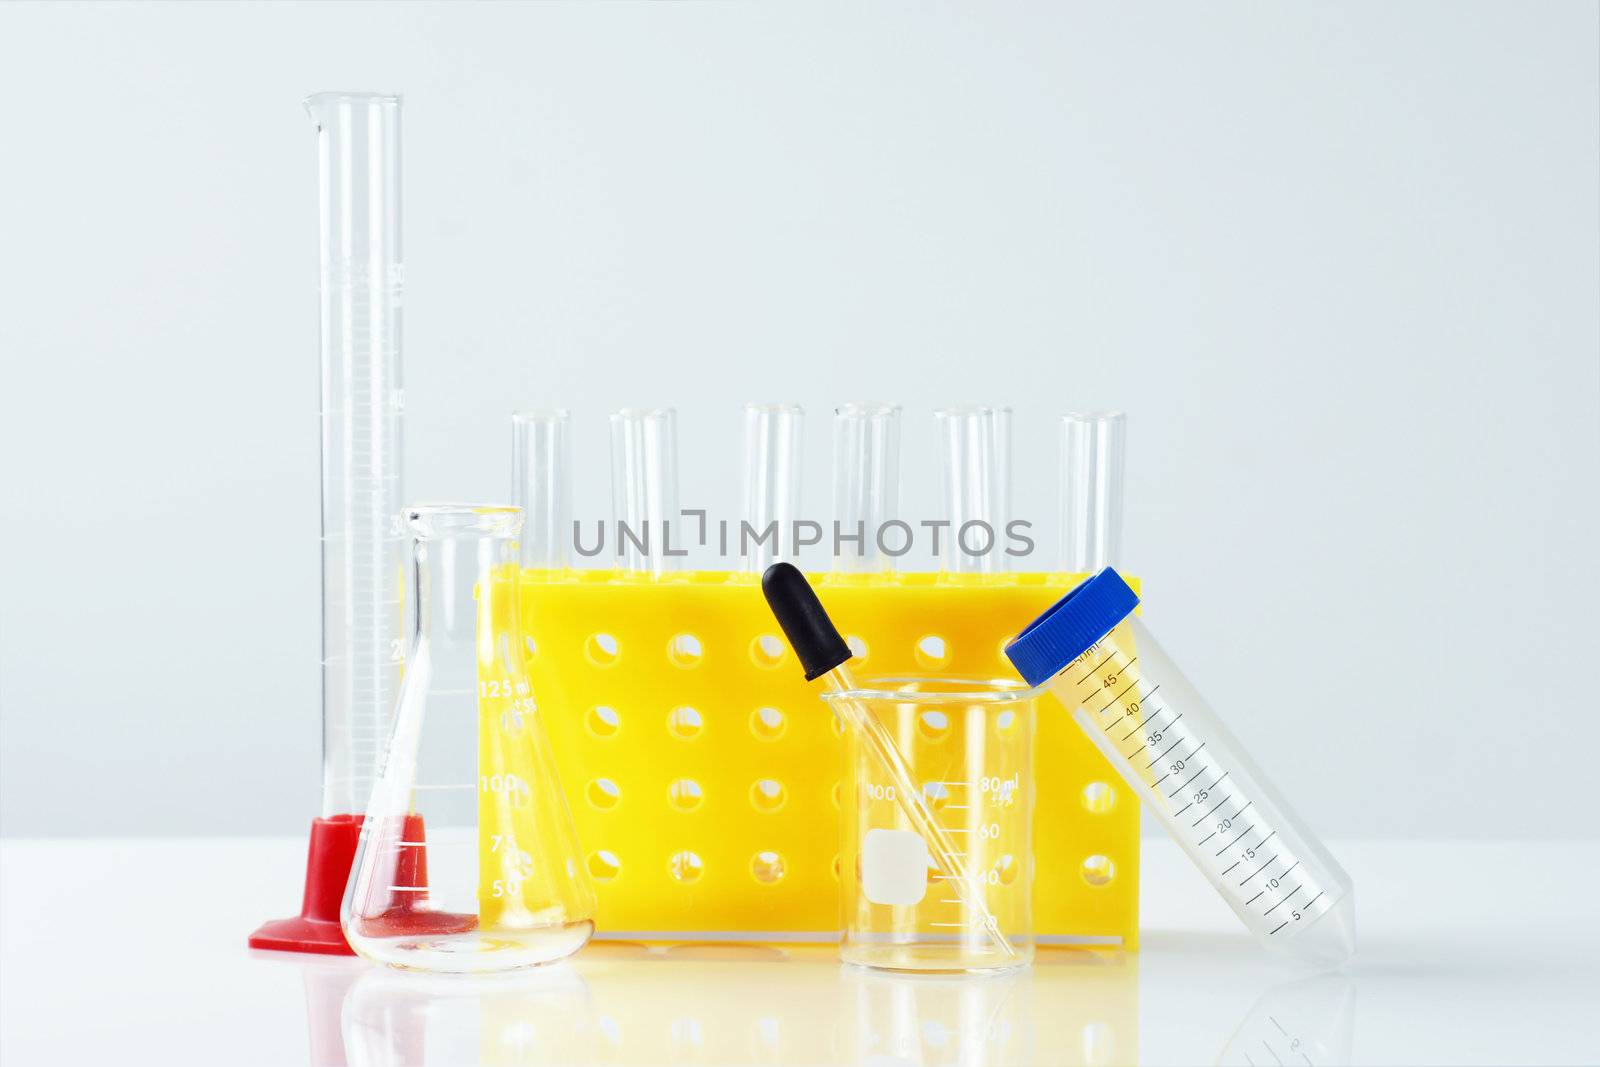 Test tubes and other laboratory glassware by Mirage3